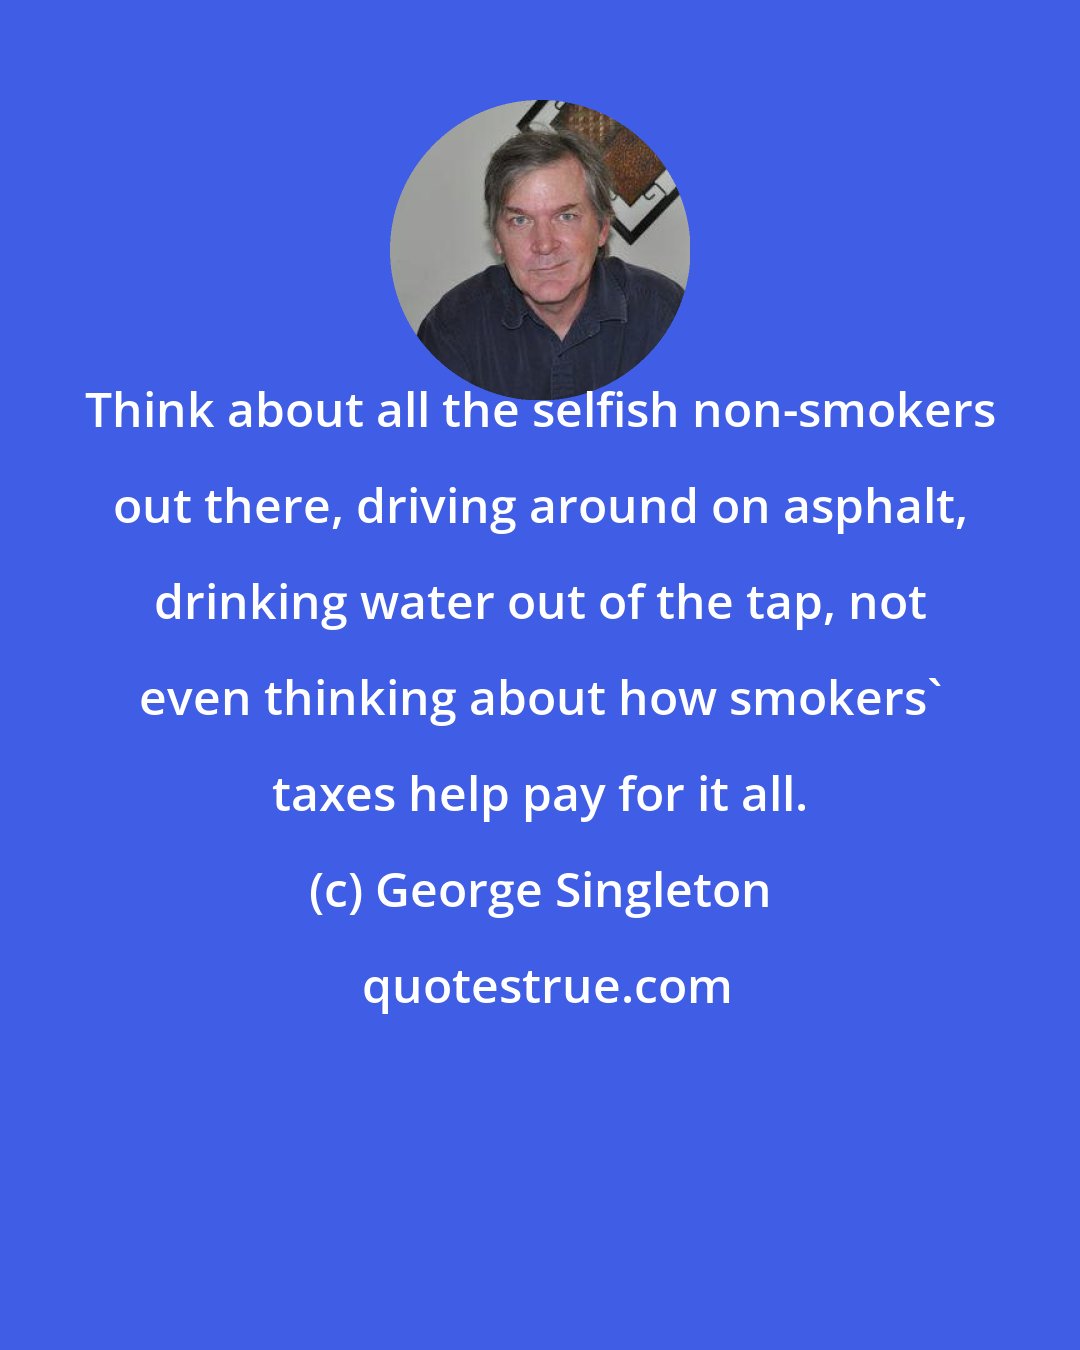 George Singleton: Think about all the selfish non-smokers out there, driving around on asphalt, drinking water out of the tap, not even thinking about how smokers' taxes help pay for it all.